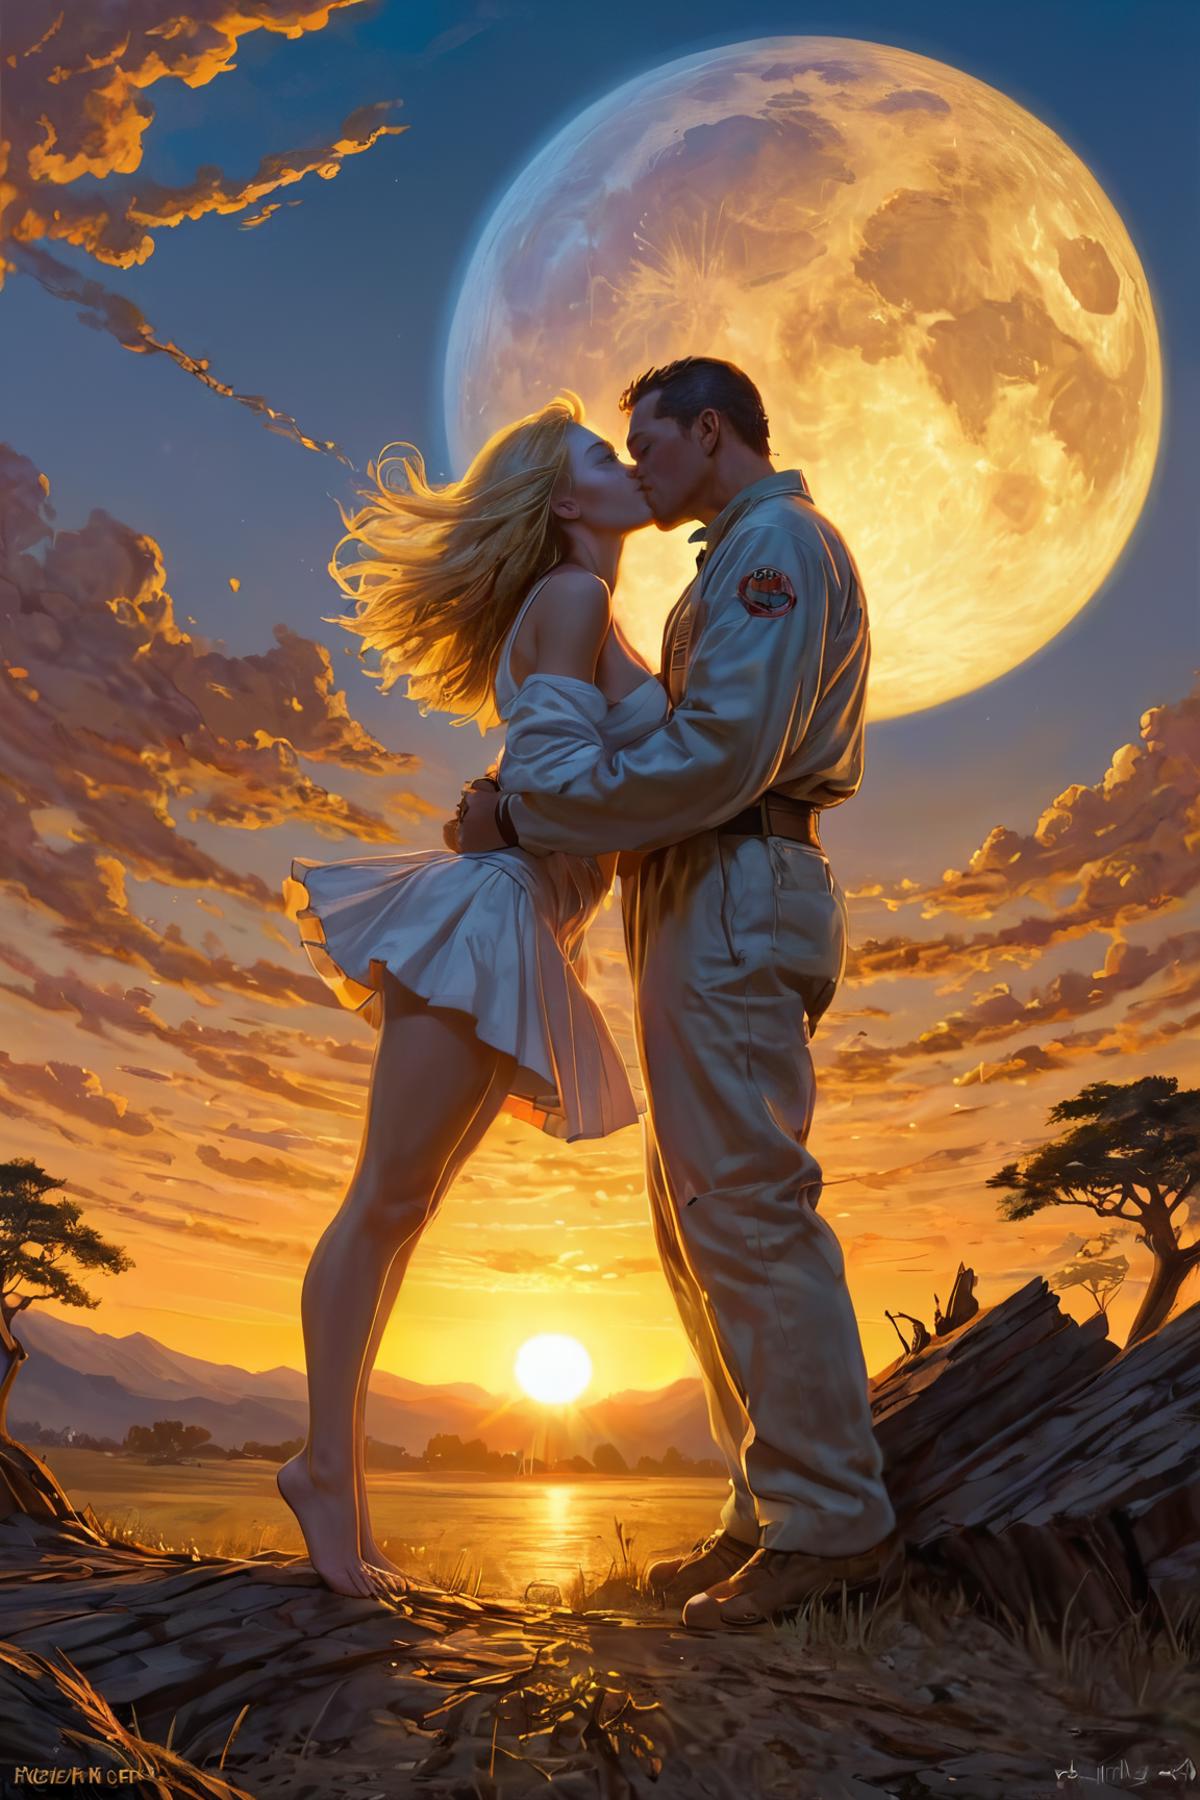 A man and a woman kissing under a moonlit sky.